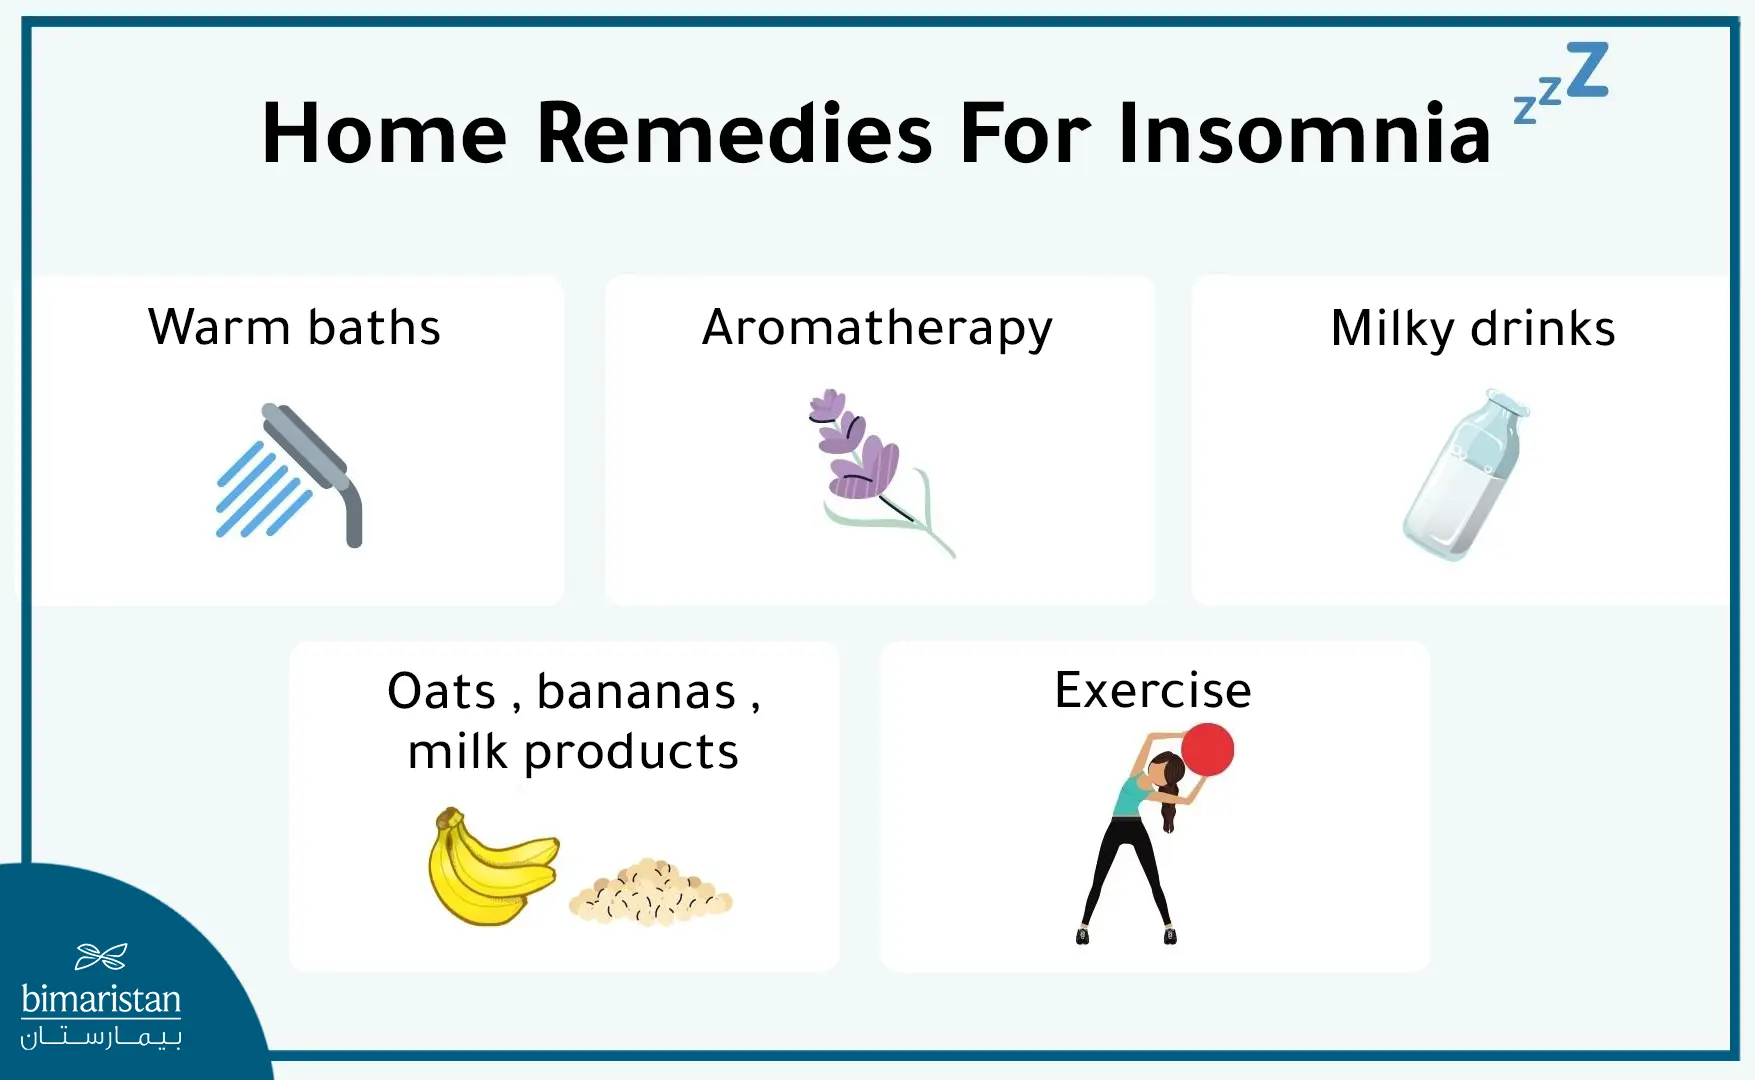 Tips to help you treat insomnia at home